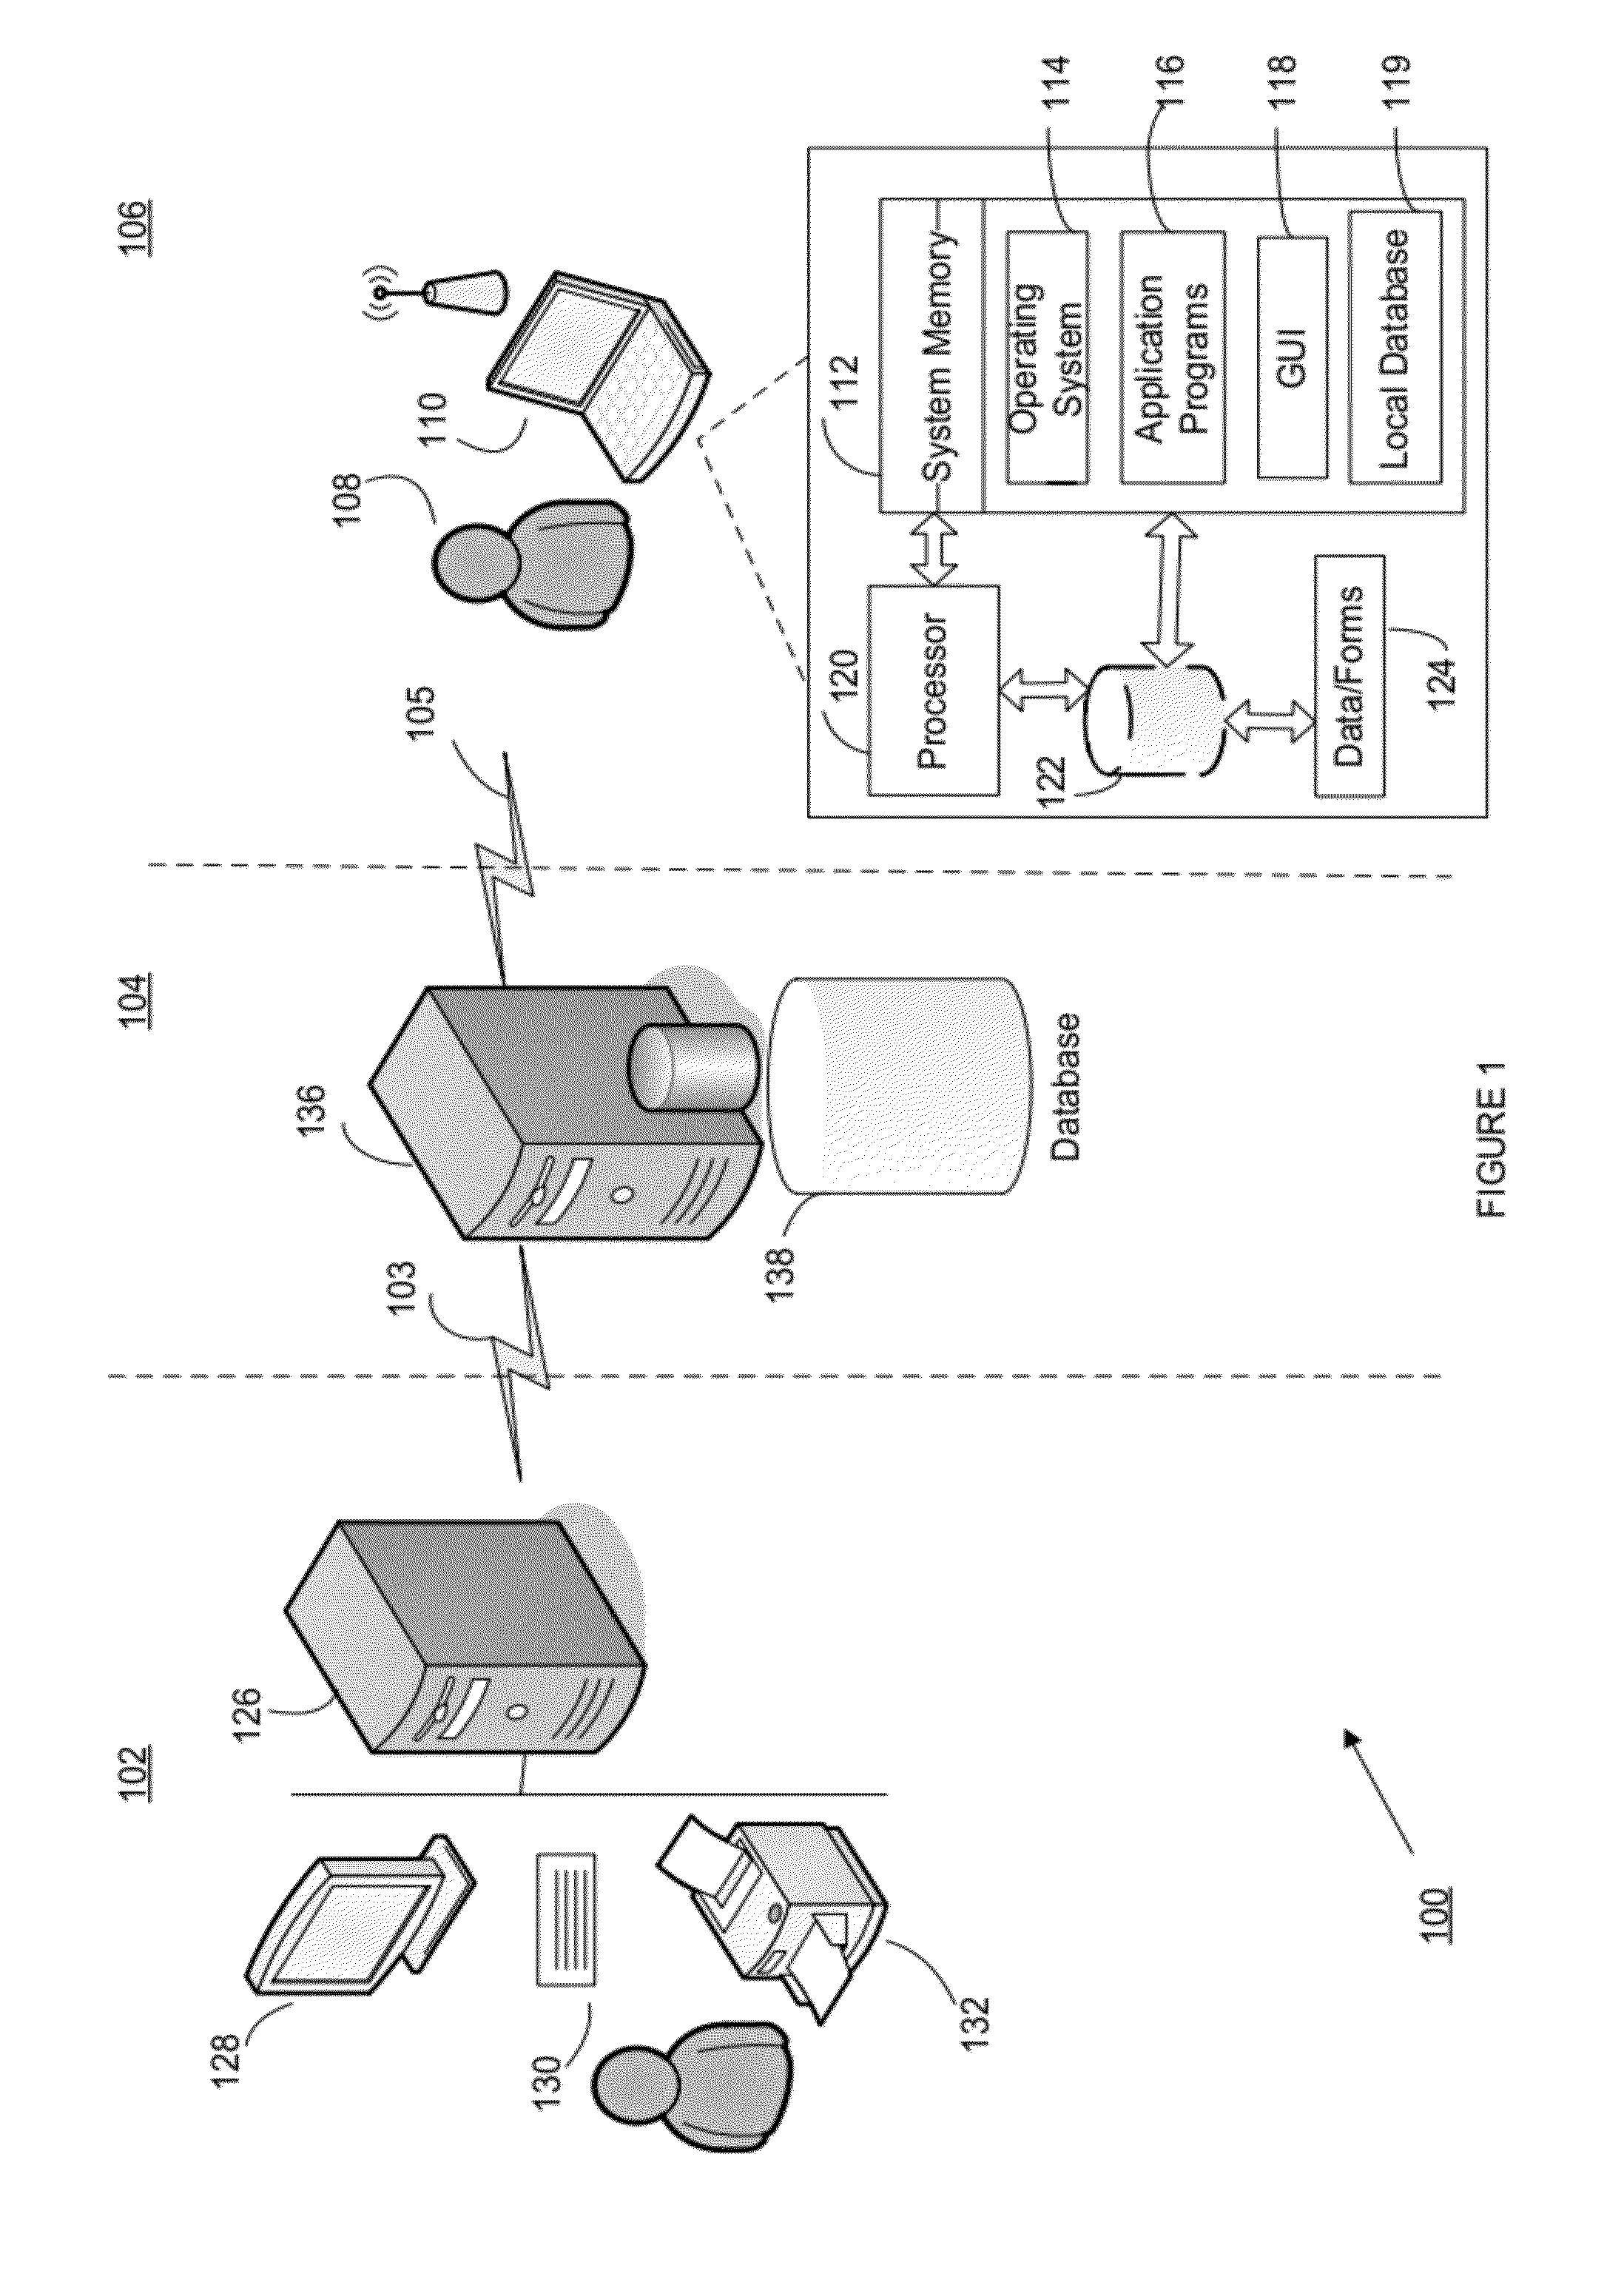 Method and system for implementing workflows and managng staff and engagements